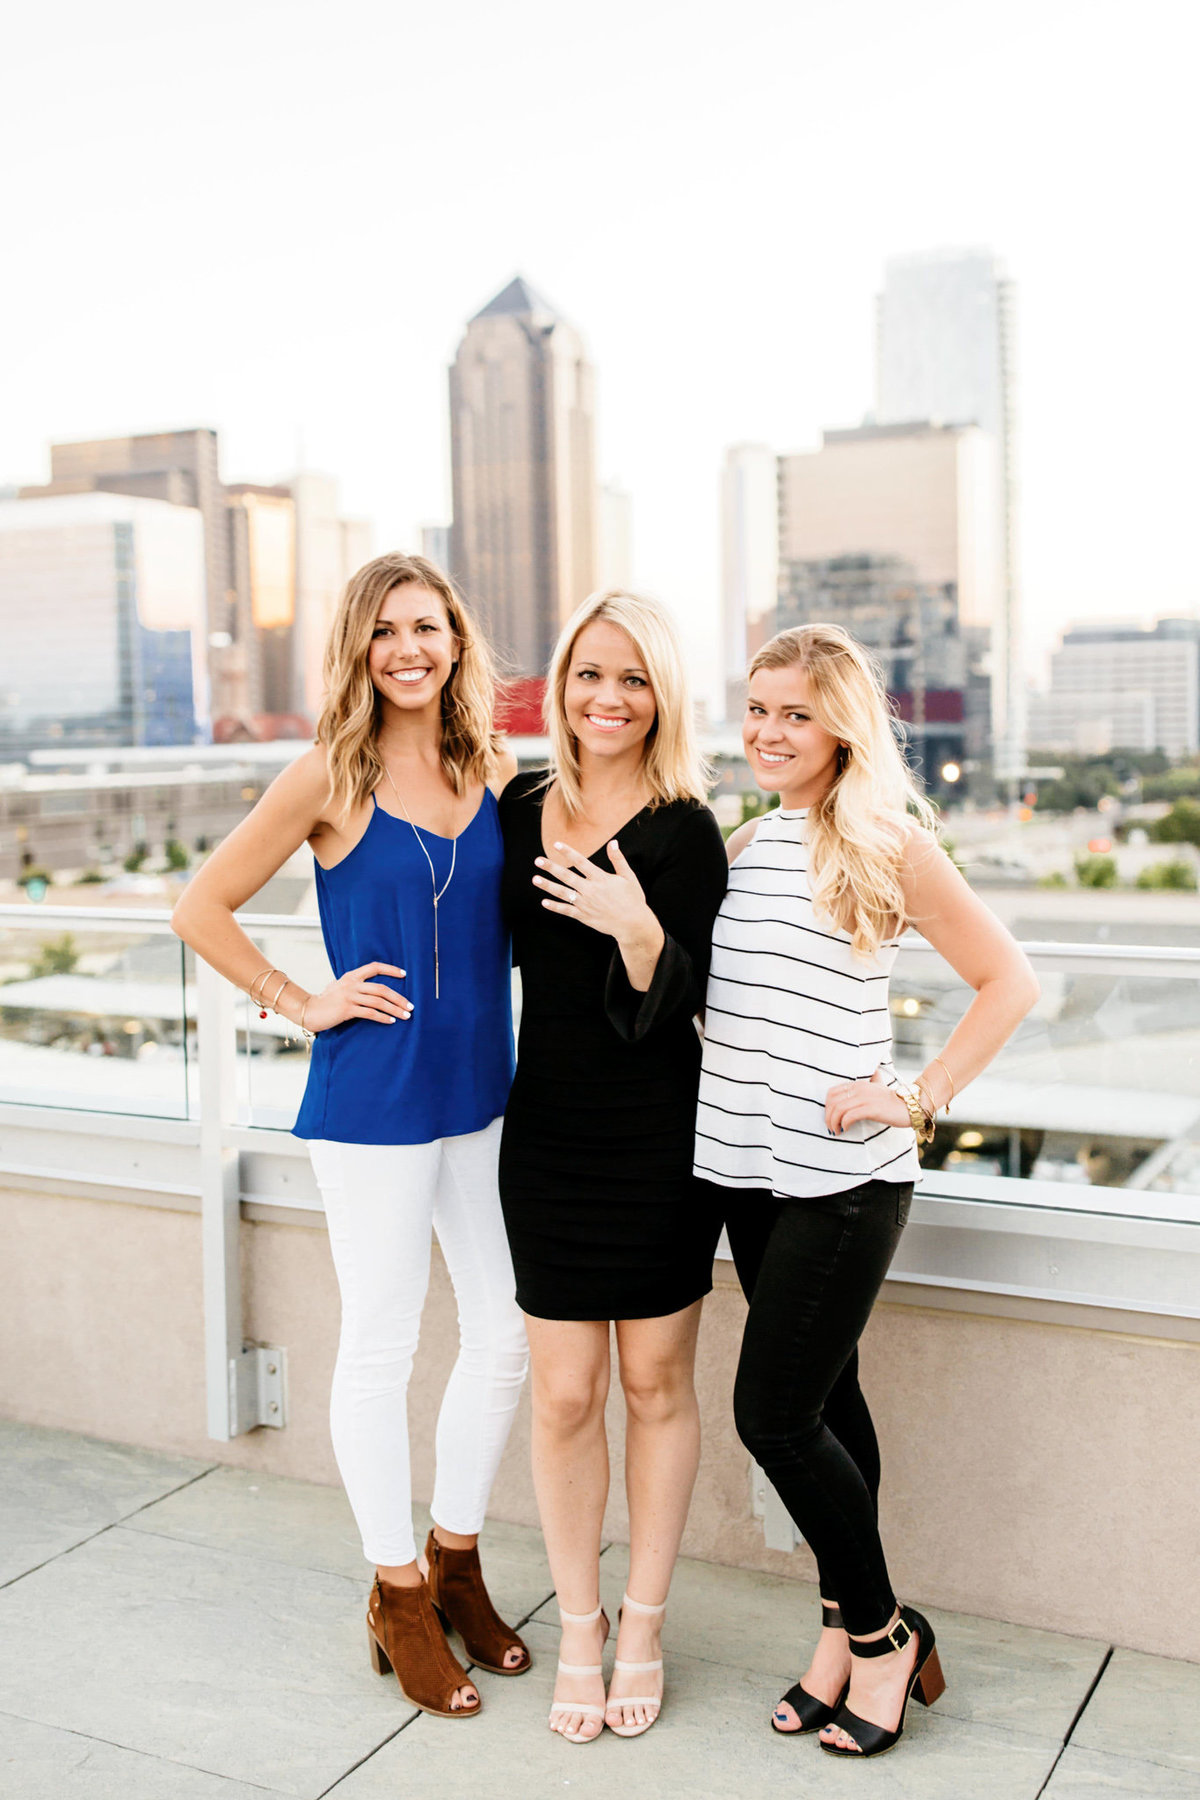 Eric & Megan - Downtown Dallas Rooftop Proposal & Engagement Session-218